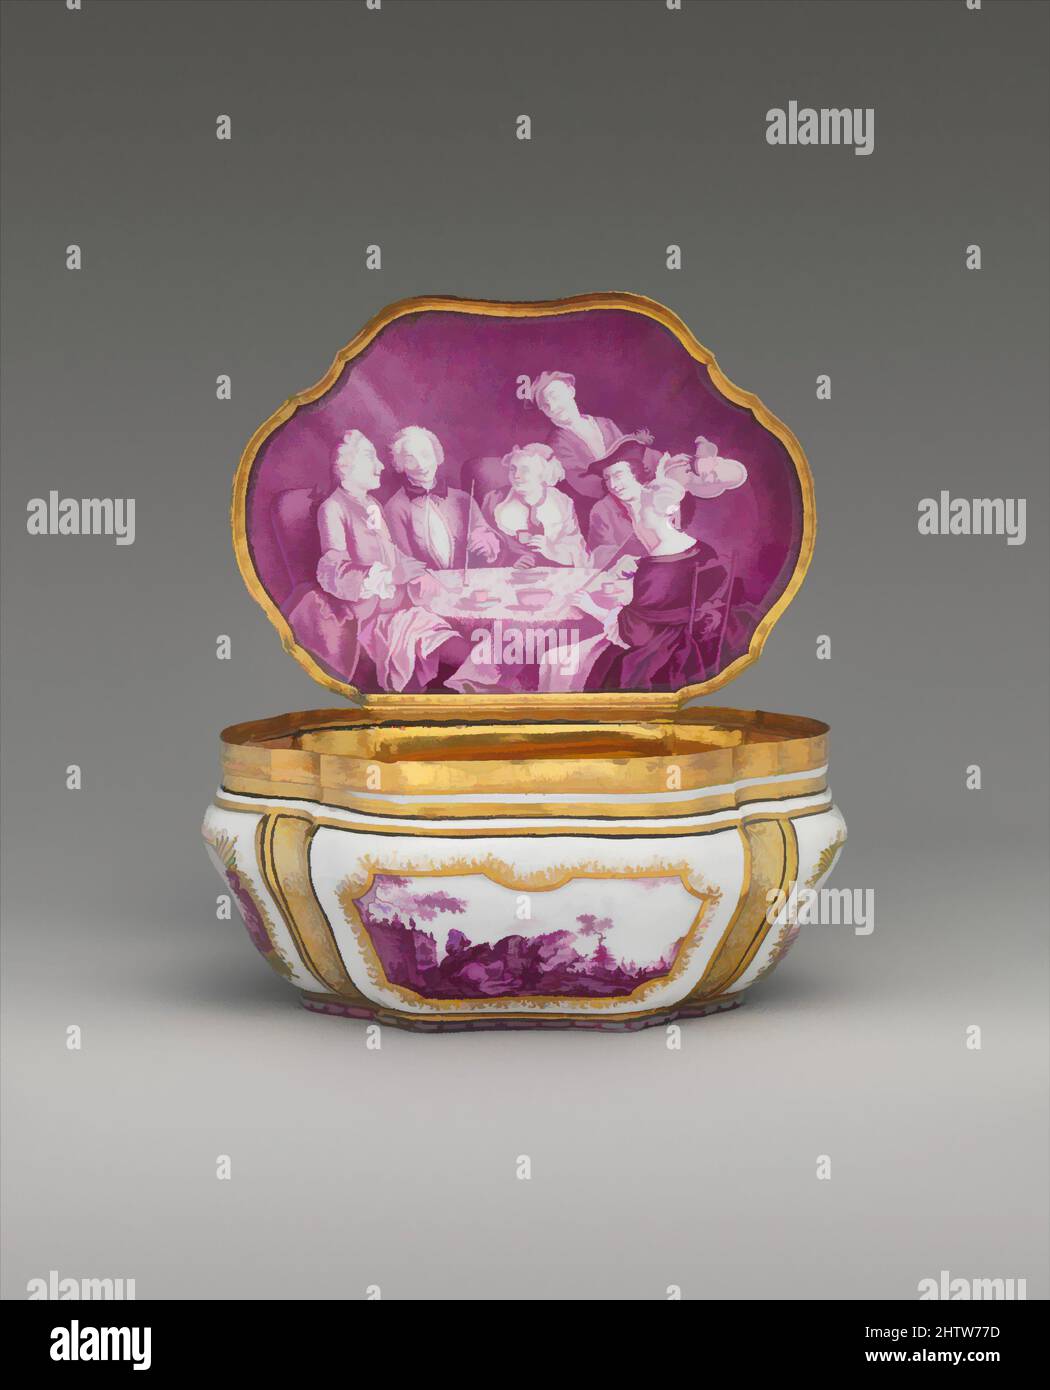 Art inspired by Table snuffbox, ca. 1750, German, Meissen, Hard-paste porcelain, copper gilt, H. 4 in. (10.2 cm.); W. 6 3/4 in. (17.1 cm.); D. 4 7/8 in. (12.4 cm.), Ceramics-Porcelain, A snuffbox of this size was placed on a table for use by a party of smokers, as illustrated on the, Classic works modernized by Artotop with a splash of modernity. Shapes, color and value, eye-catching visual impact on art. Emotions through freedom of artworks in a contemporary way. A timeless message pursuing a wildly creative new direction. Artists turning to the digital medium and creating the Artotop NFT Stock Photo